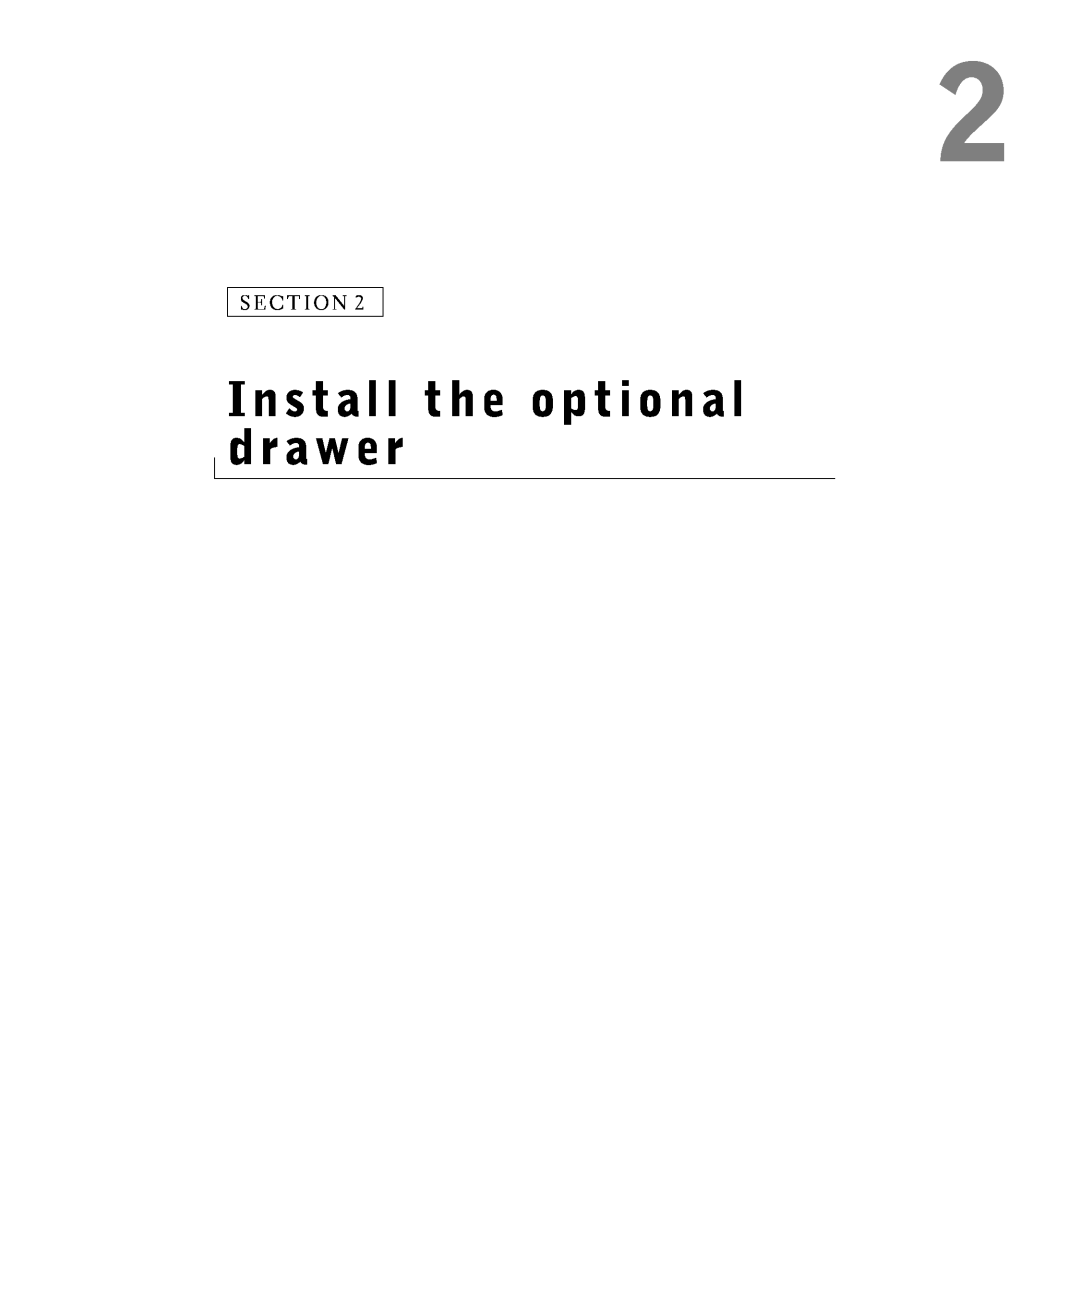 Dell S2500 owner manual Install the optional drawer, S E C T I O N 